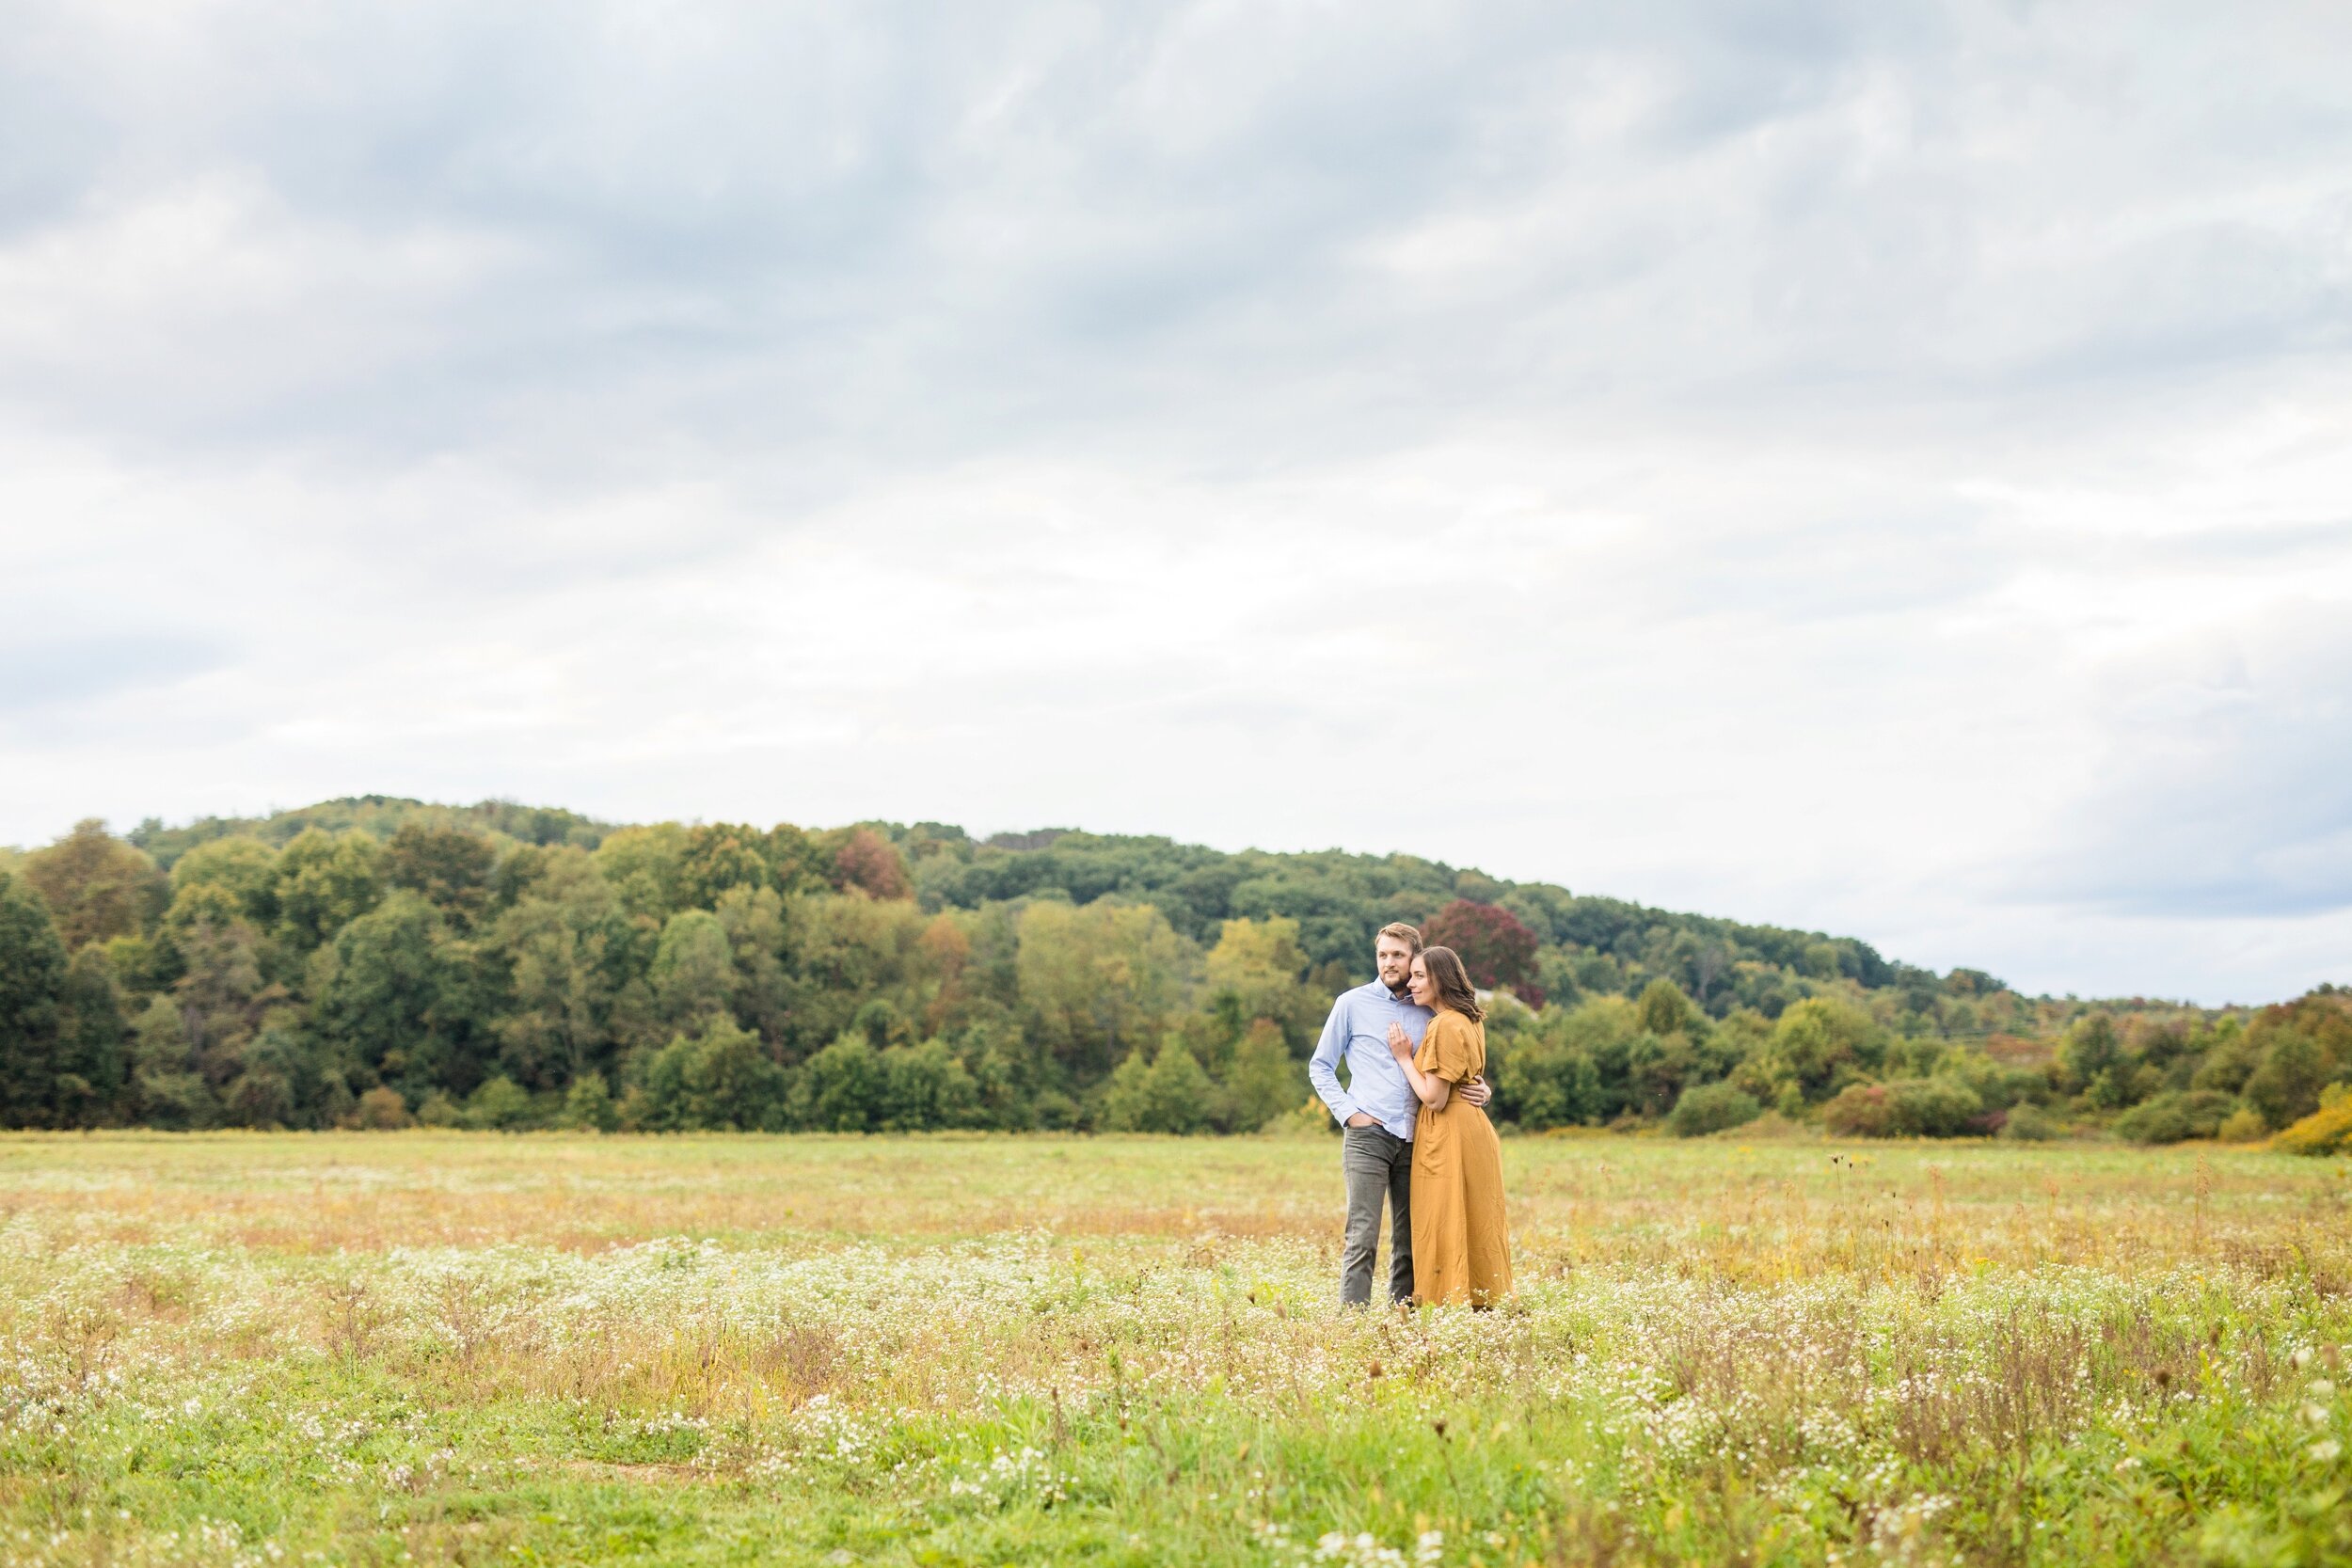 location ideas for photo sessions near cranberry township and zelienople, cranberry township photographer, zelienople photographer, north pittsburgh photographer, historic harmony photos